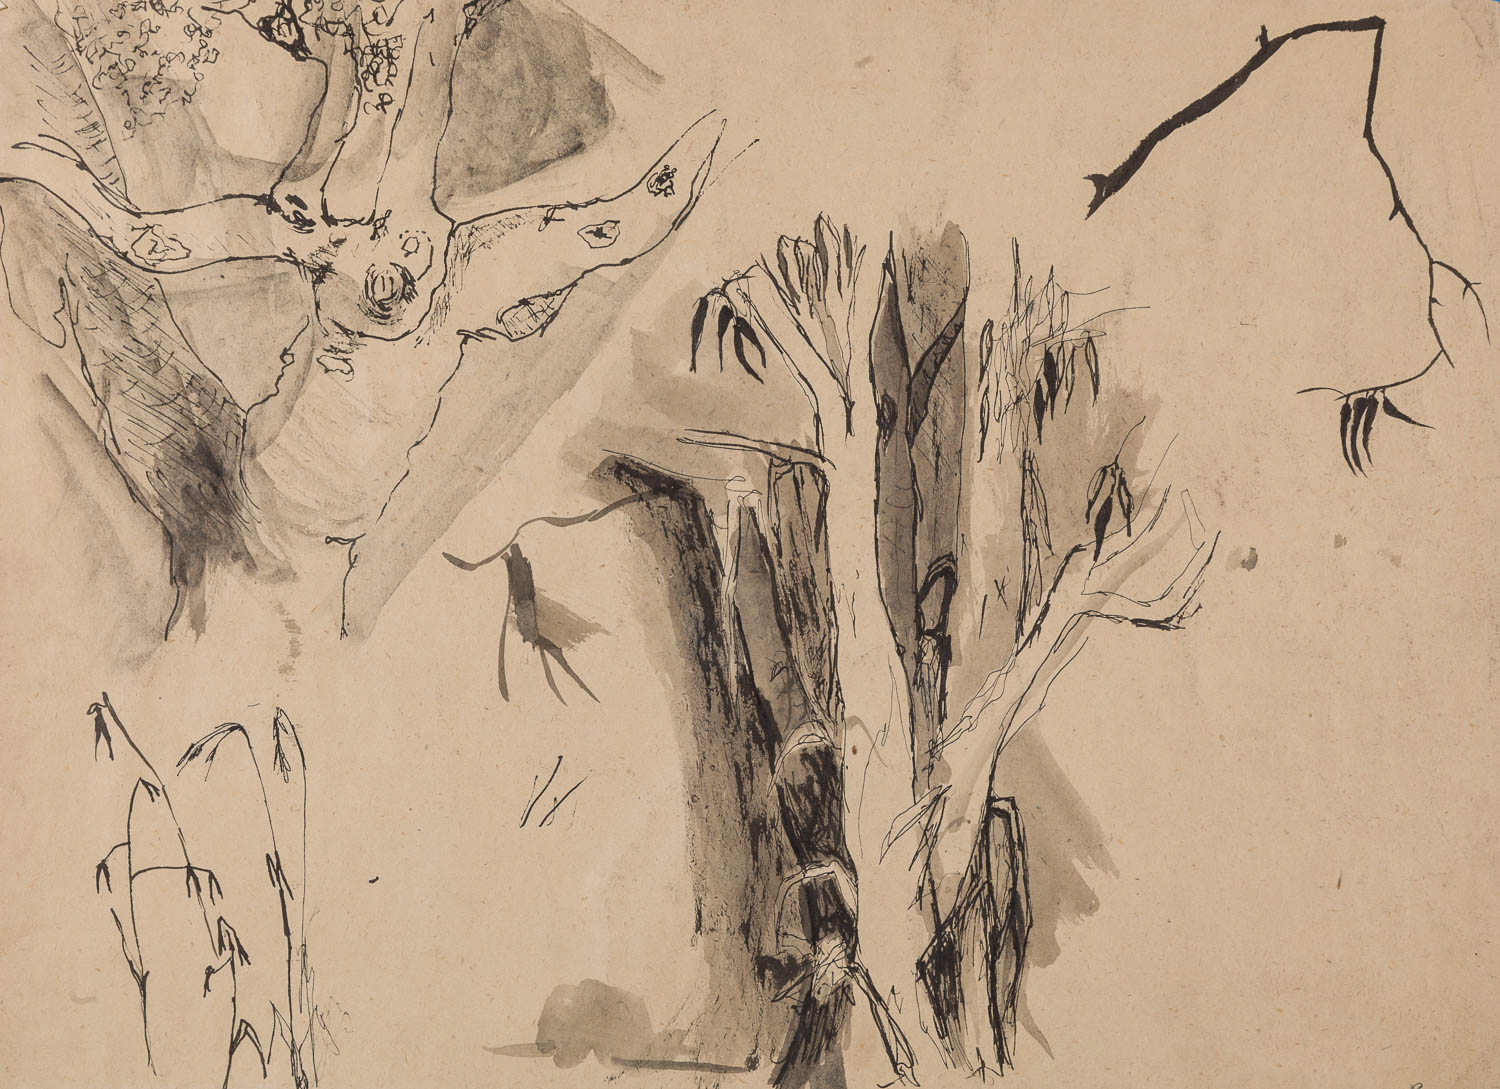 Art teacher Robert Frame taught Barbara Kemp Cowlin discipline while inspiring students. This is her sketch of eucalyptus trees from her studies with him.